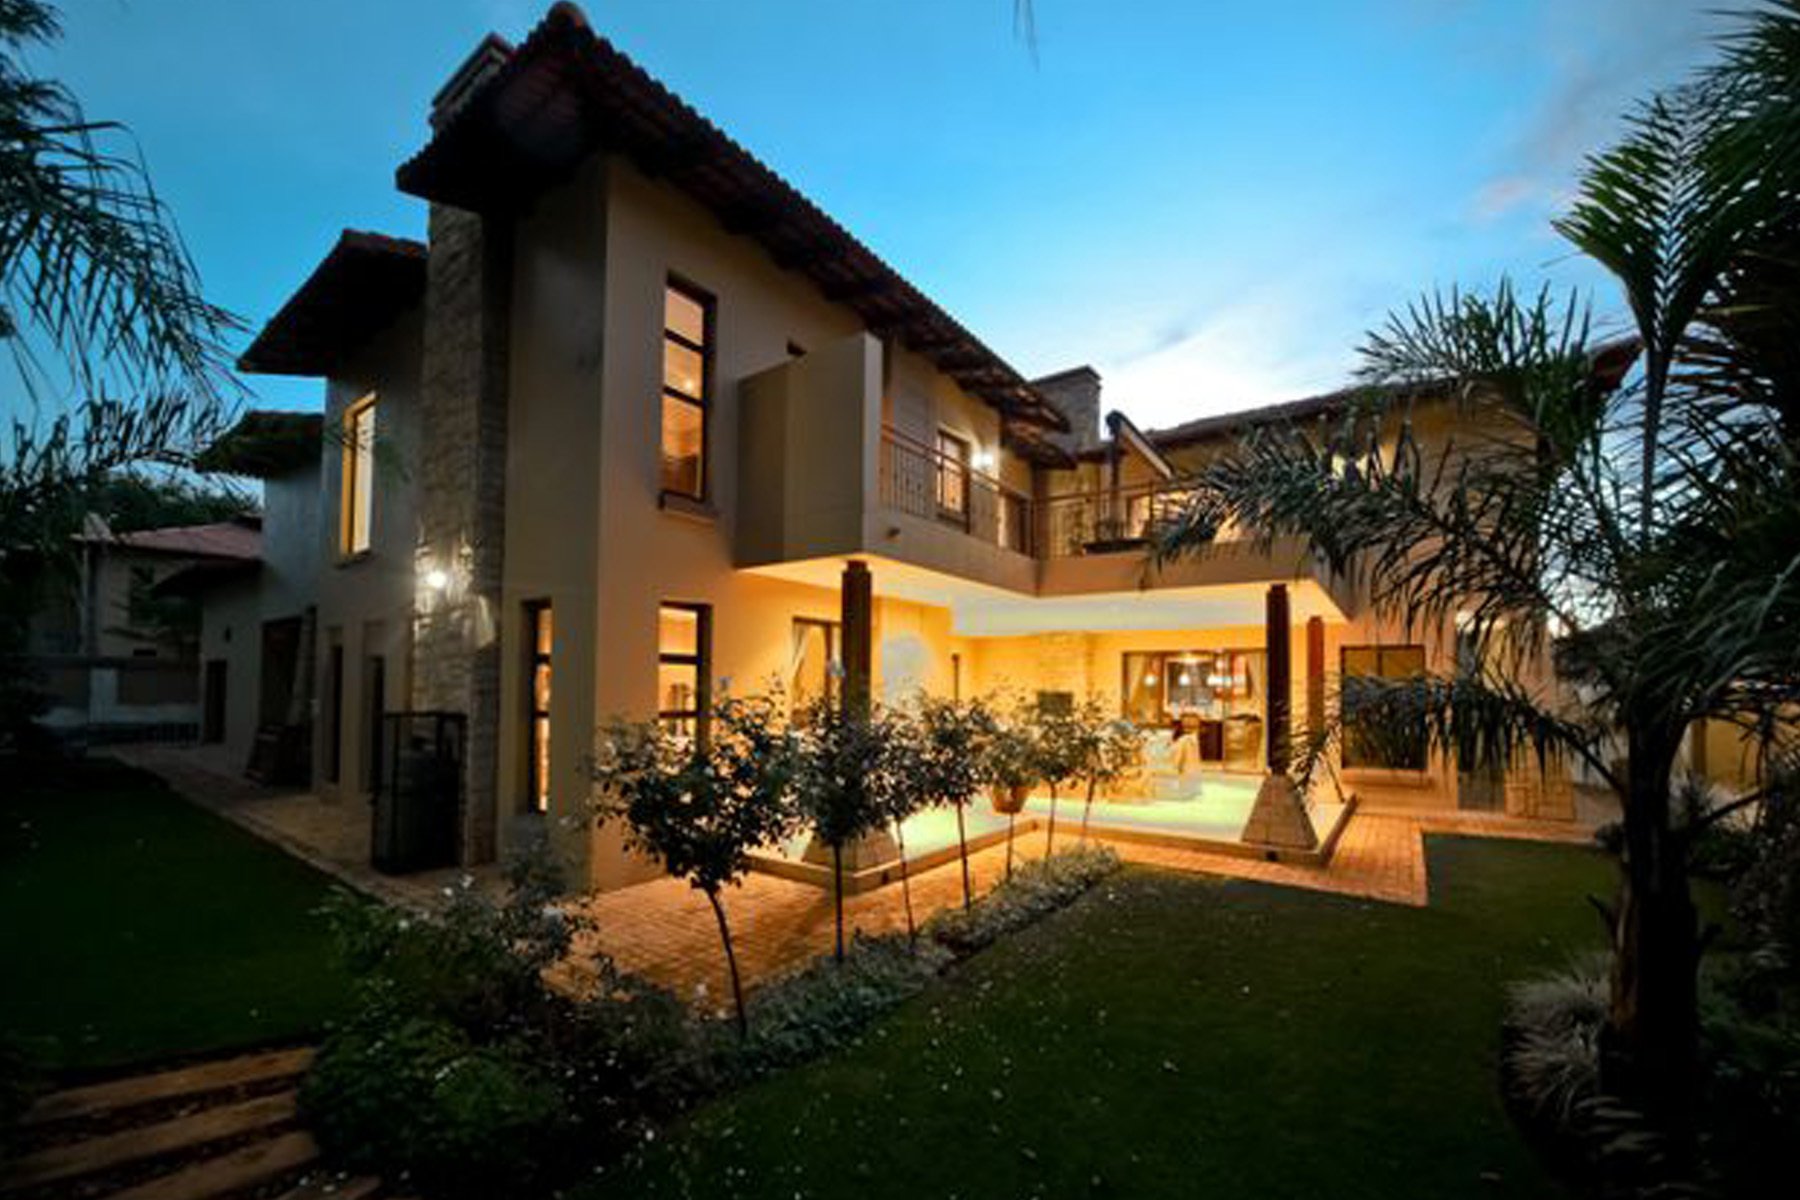 Bedfordview in Johannesburg, South Africa for sale (1010070)